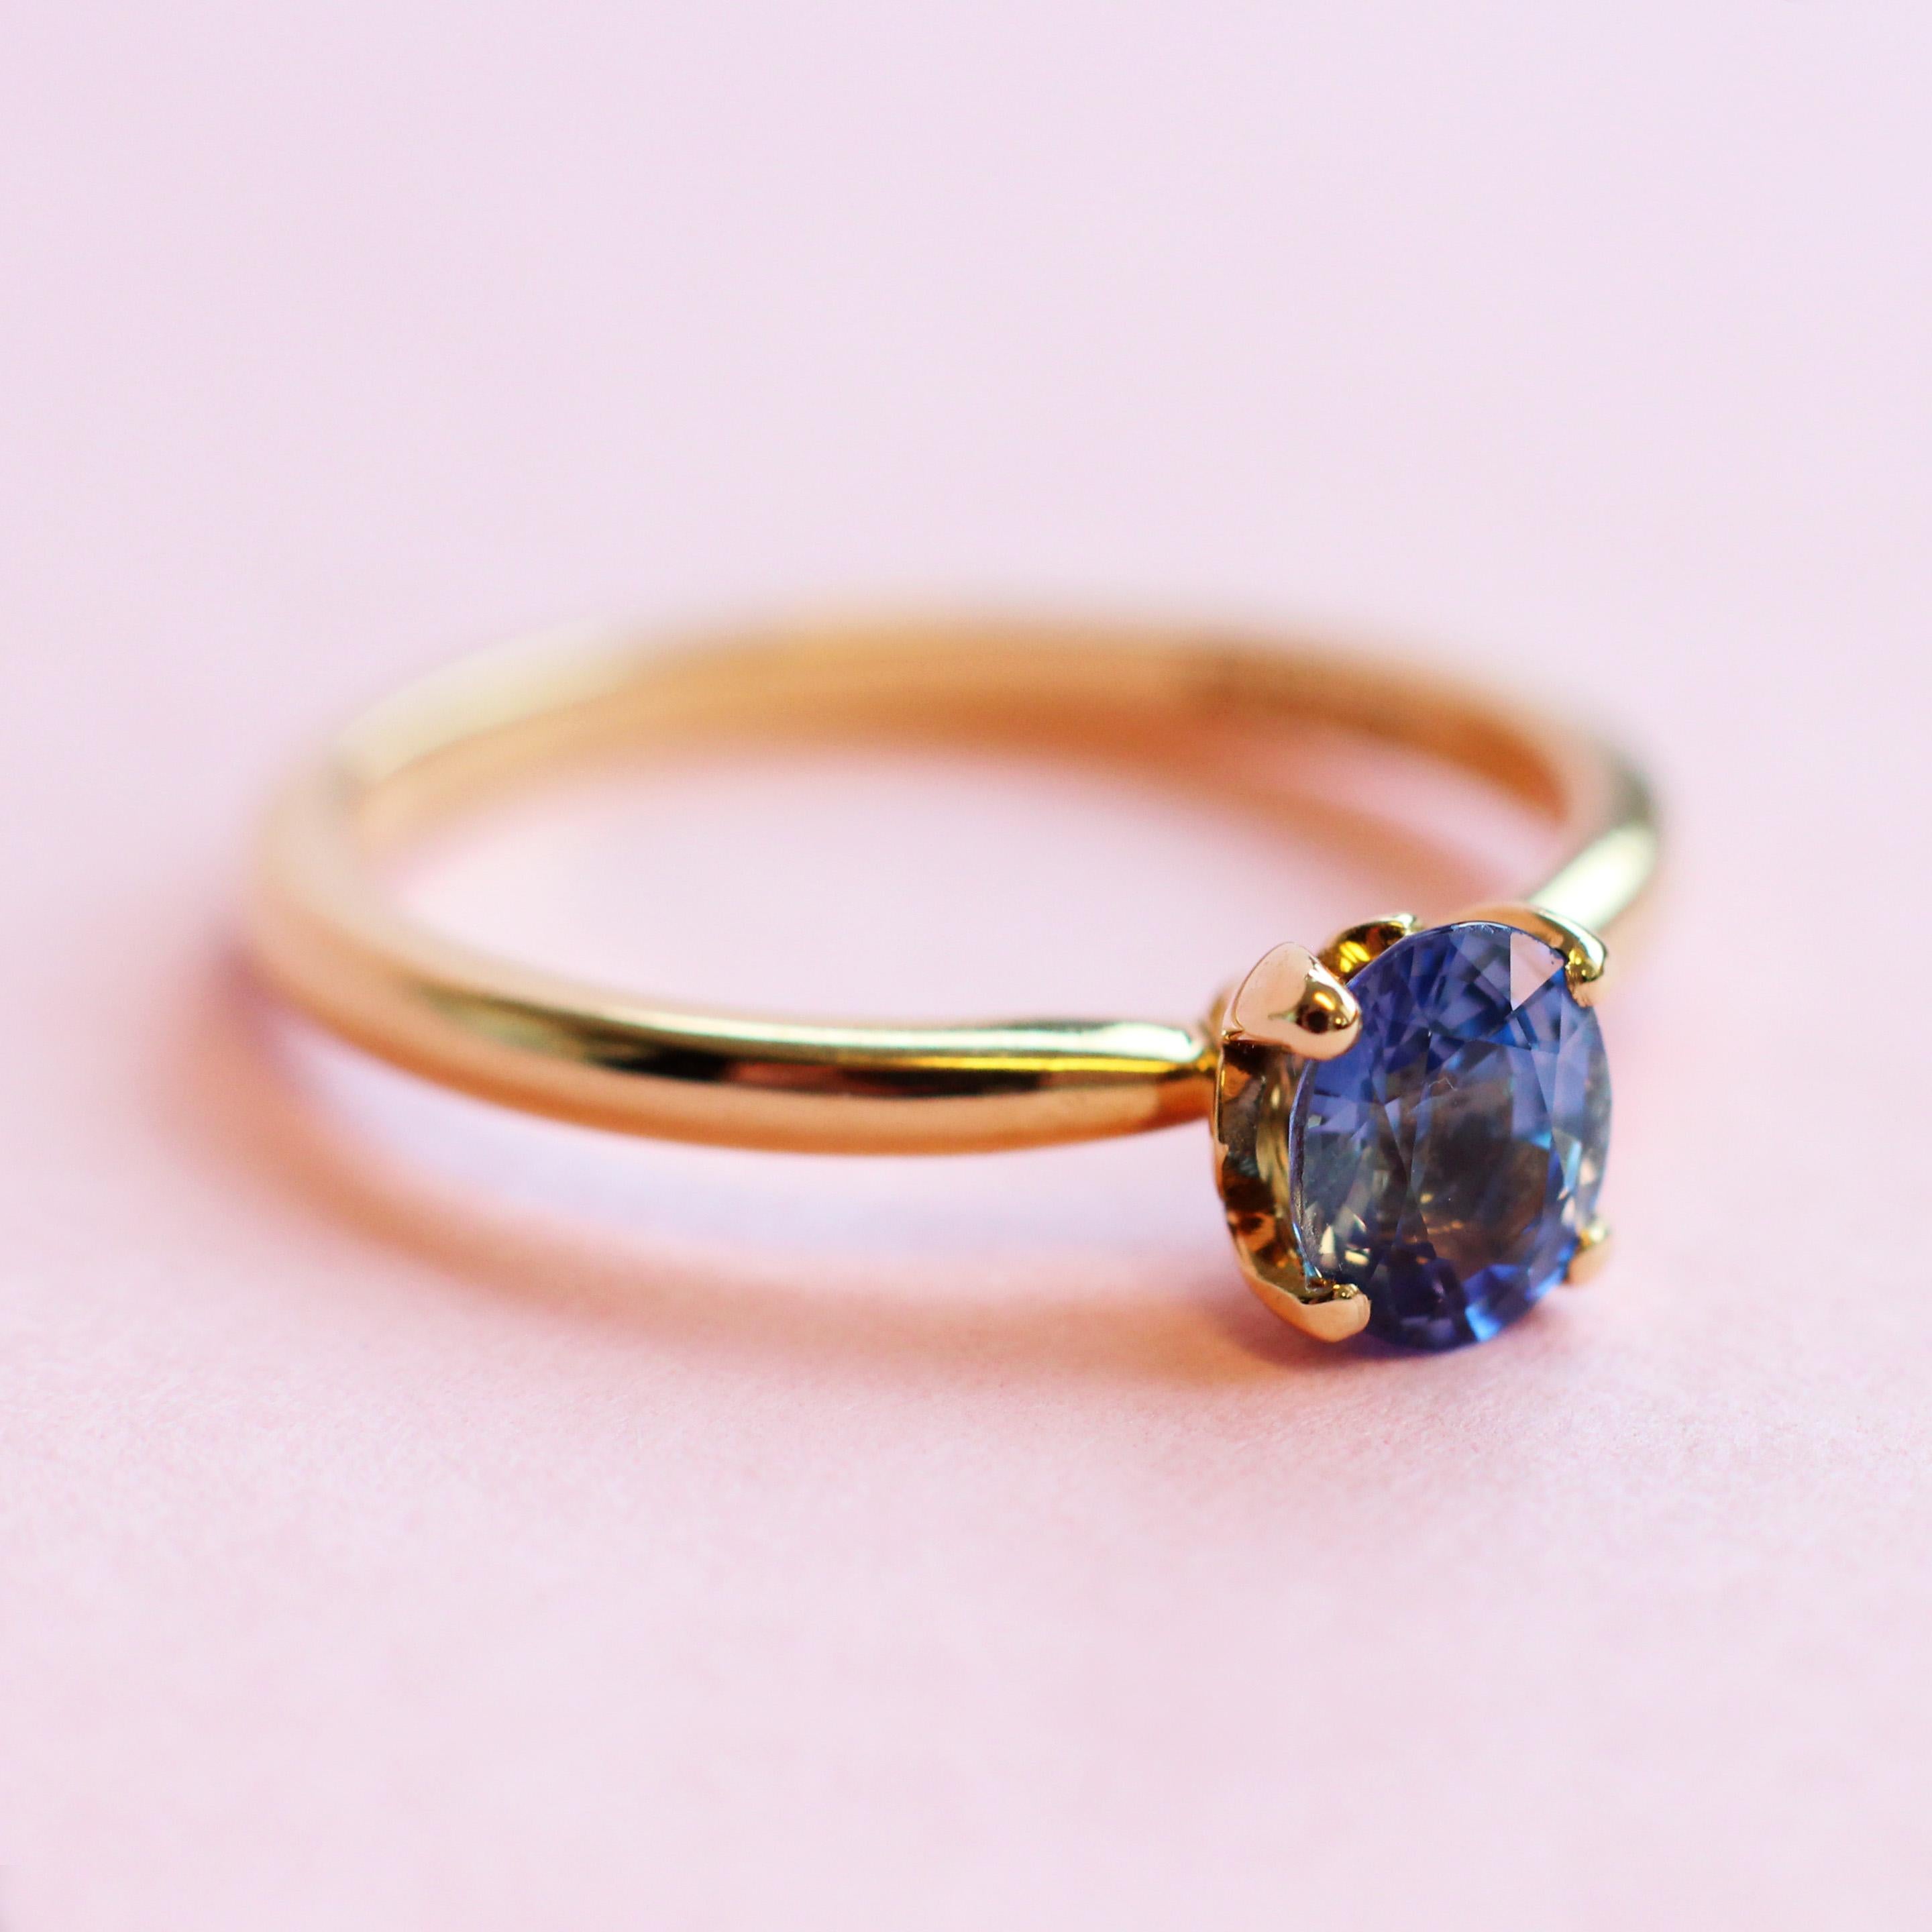 For Sale:  Blue Sapphire Solitaire Ring in 18 Karat Yellow Gold 6